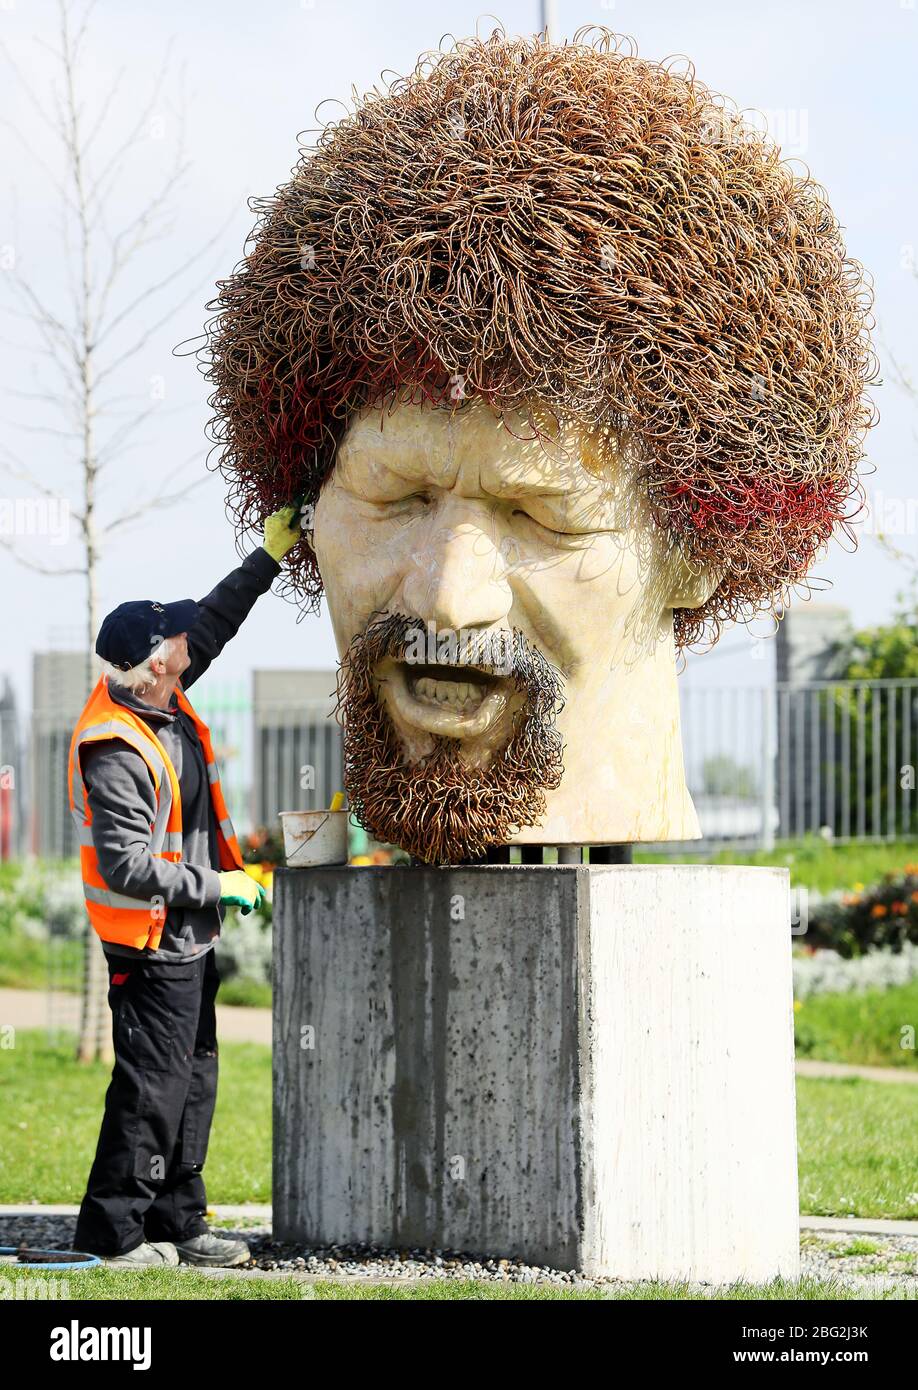 Ross Sheridan of P.Mac Cleaning and Restoration services working on behalf of Dublin City Council cleans a statue of the late musician Luke Kelly in the Sherriff street area of Dublin, after it was defaced for the fourth time in the past year. Stock Photo